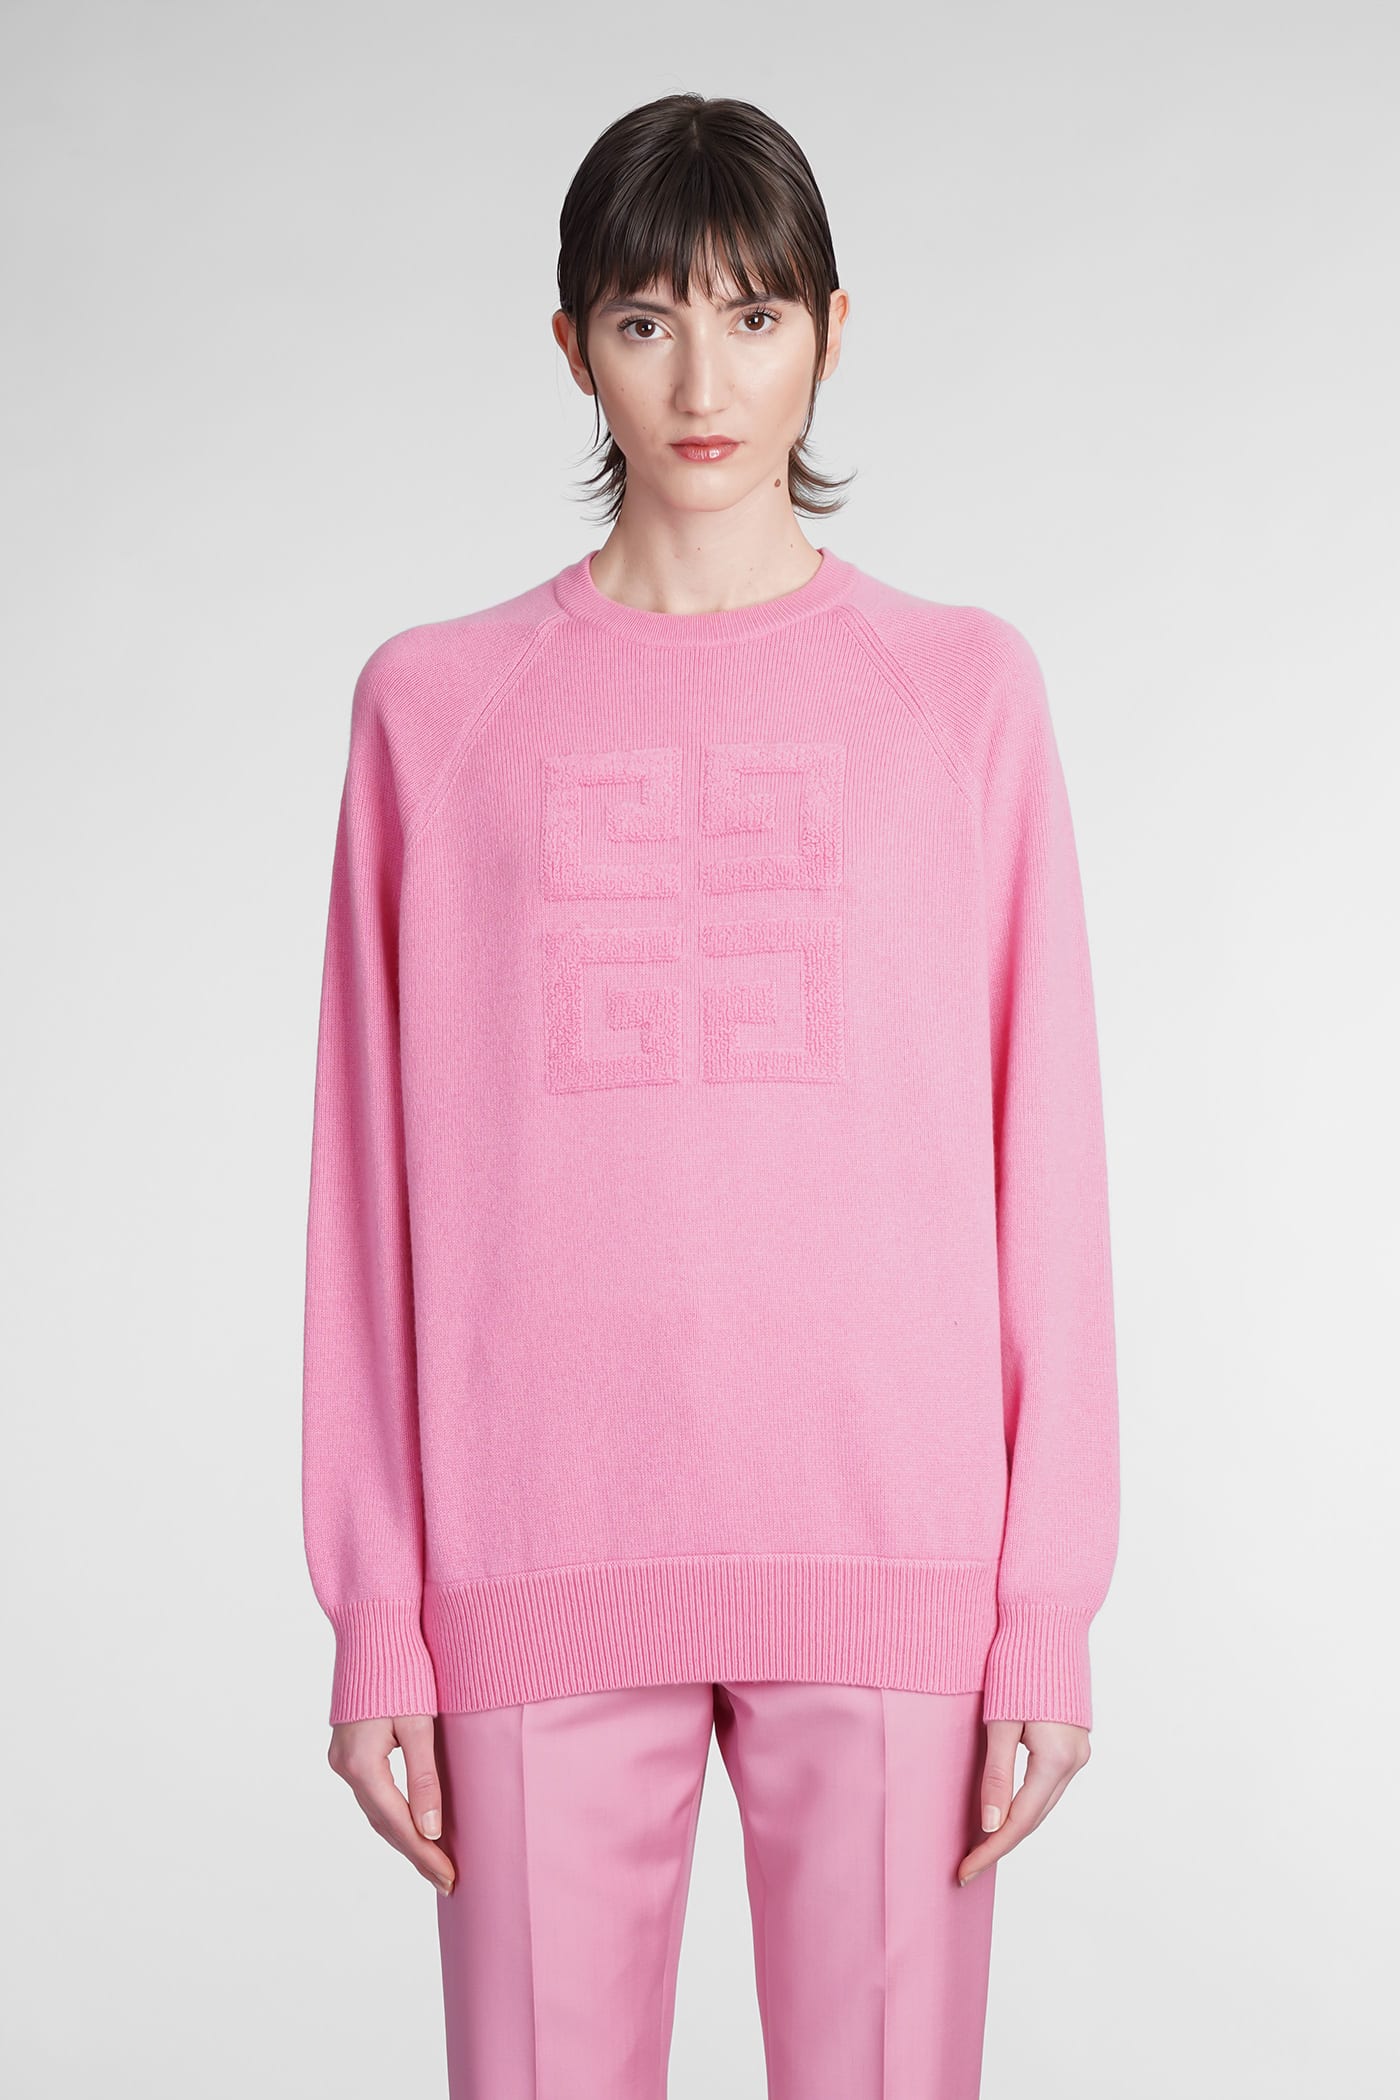 GIVENCHY KNITWEAR IN ROSE-PINK CASHMERE